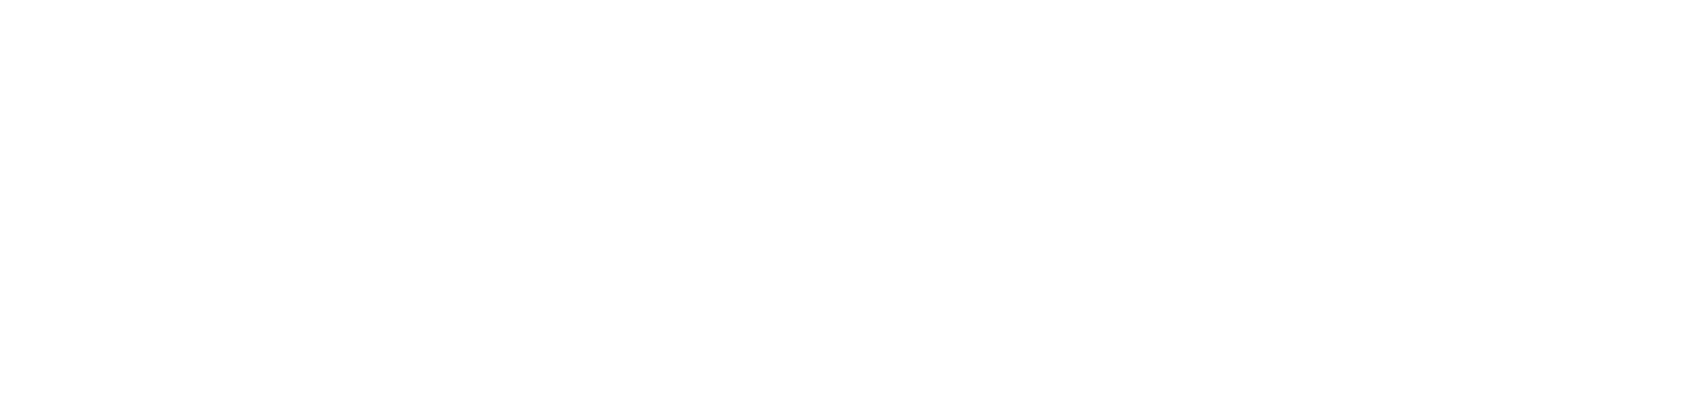 SpinServers